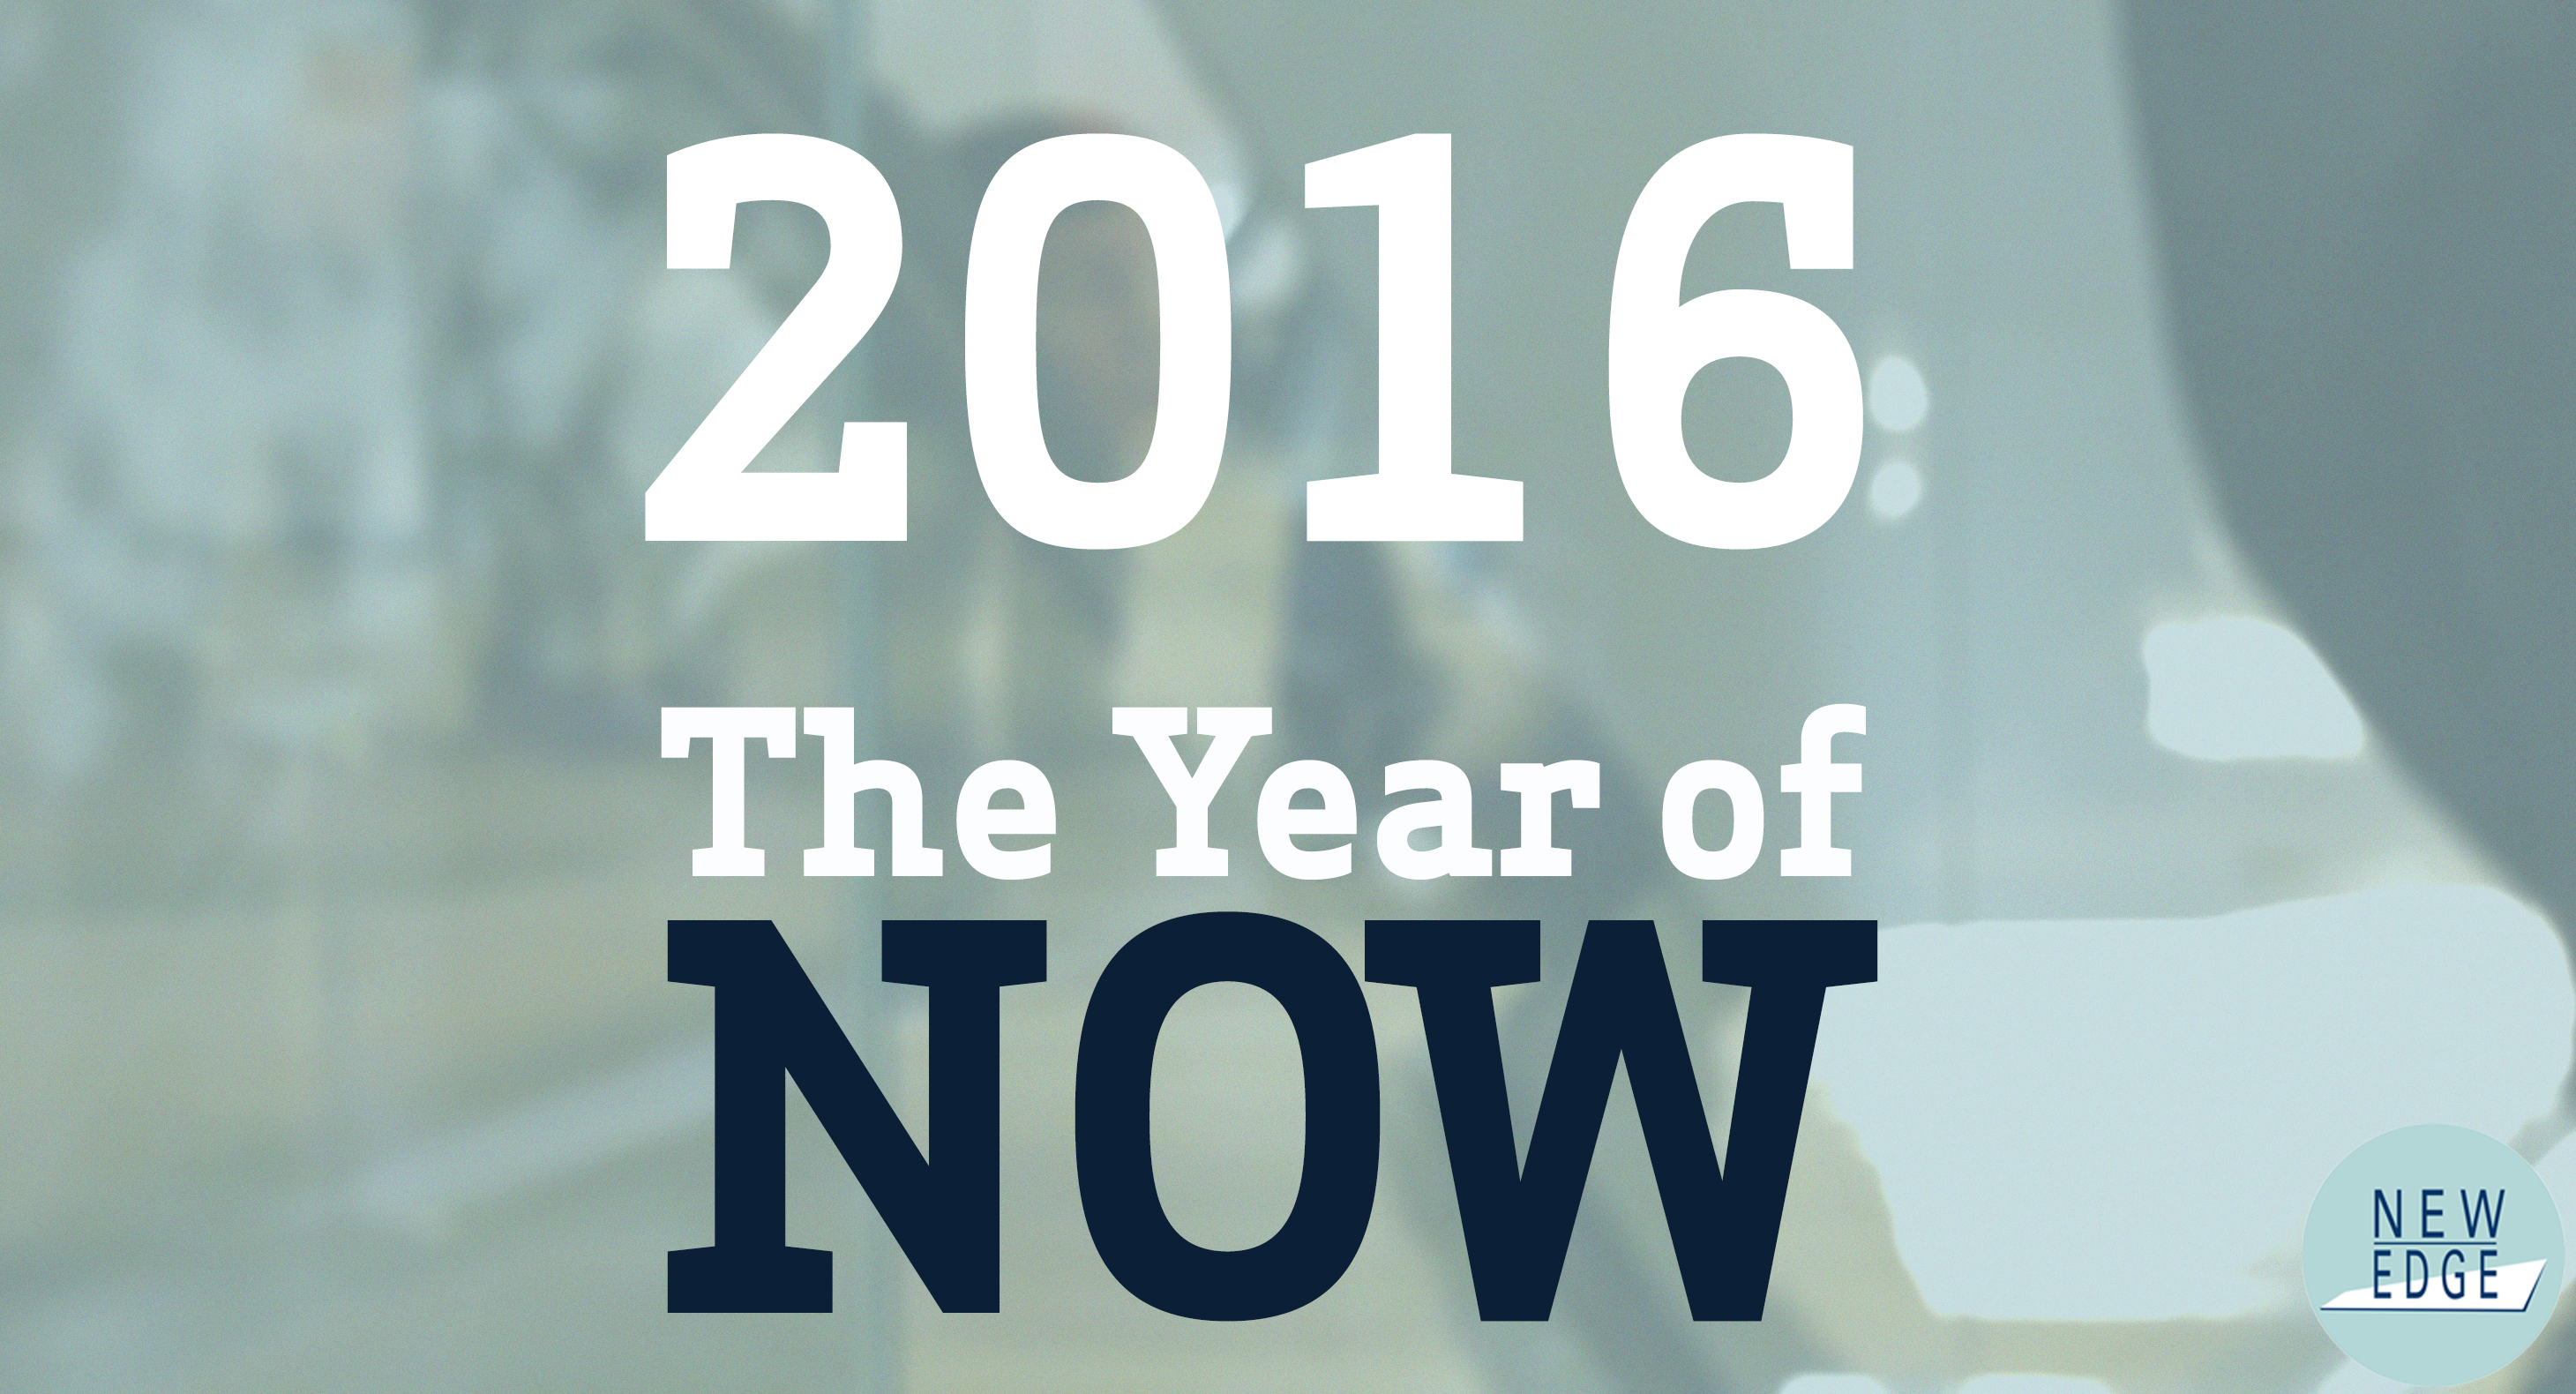 Are you going to live 2016 in the now, or choose to avoid things for fear of the ‘what if’s?